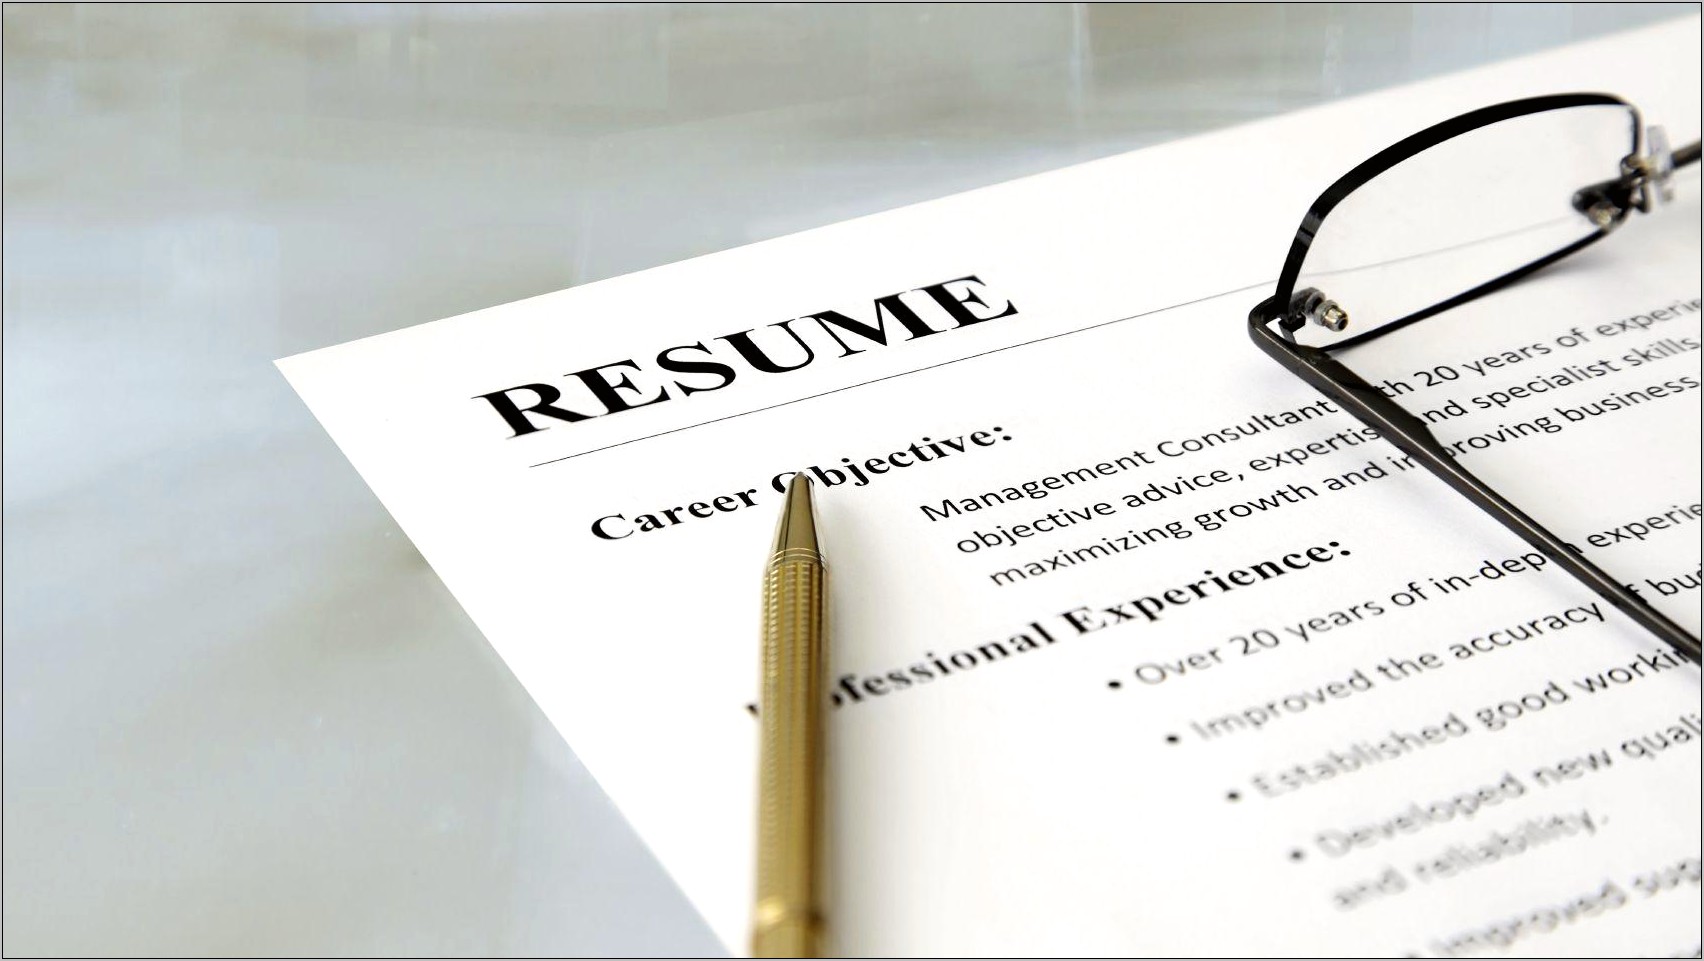 Types Of Objectives For Resume